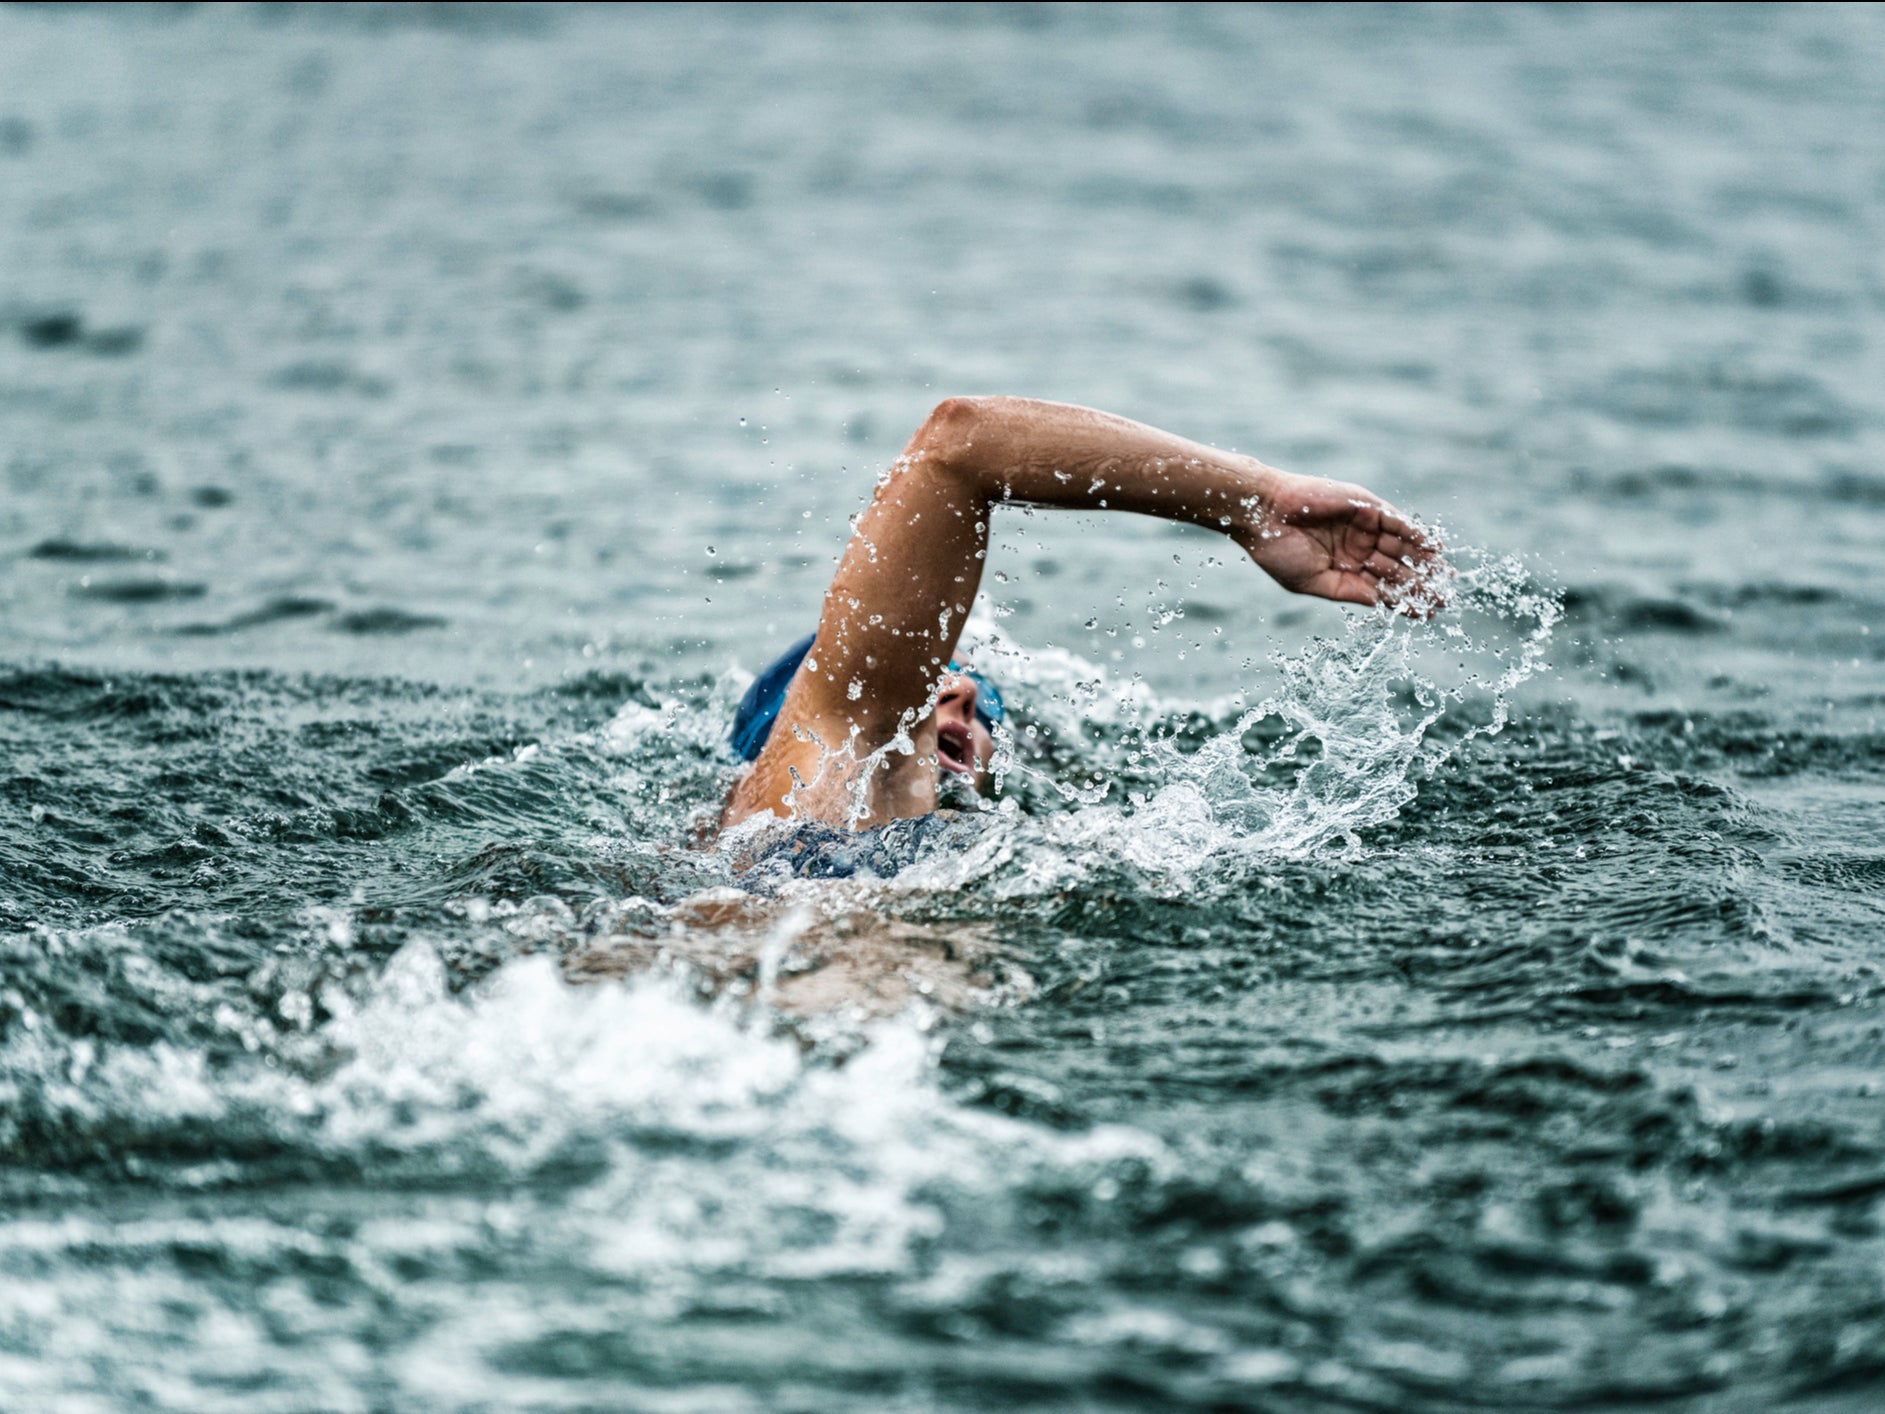 People planning to go open water swimming must be aware of the risks involved in order to stay safe